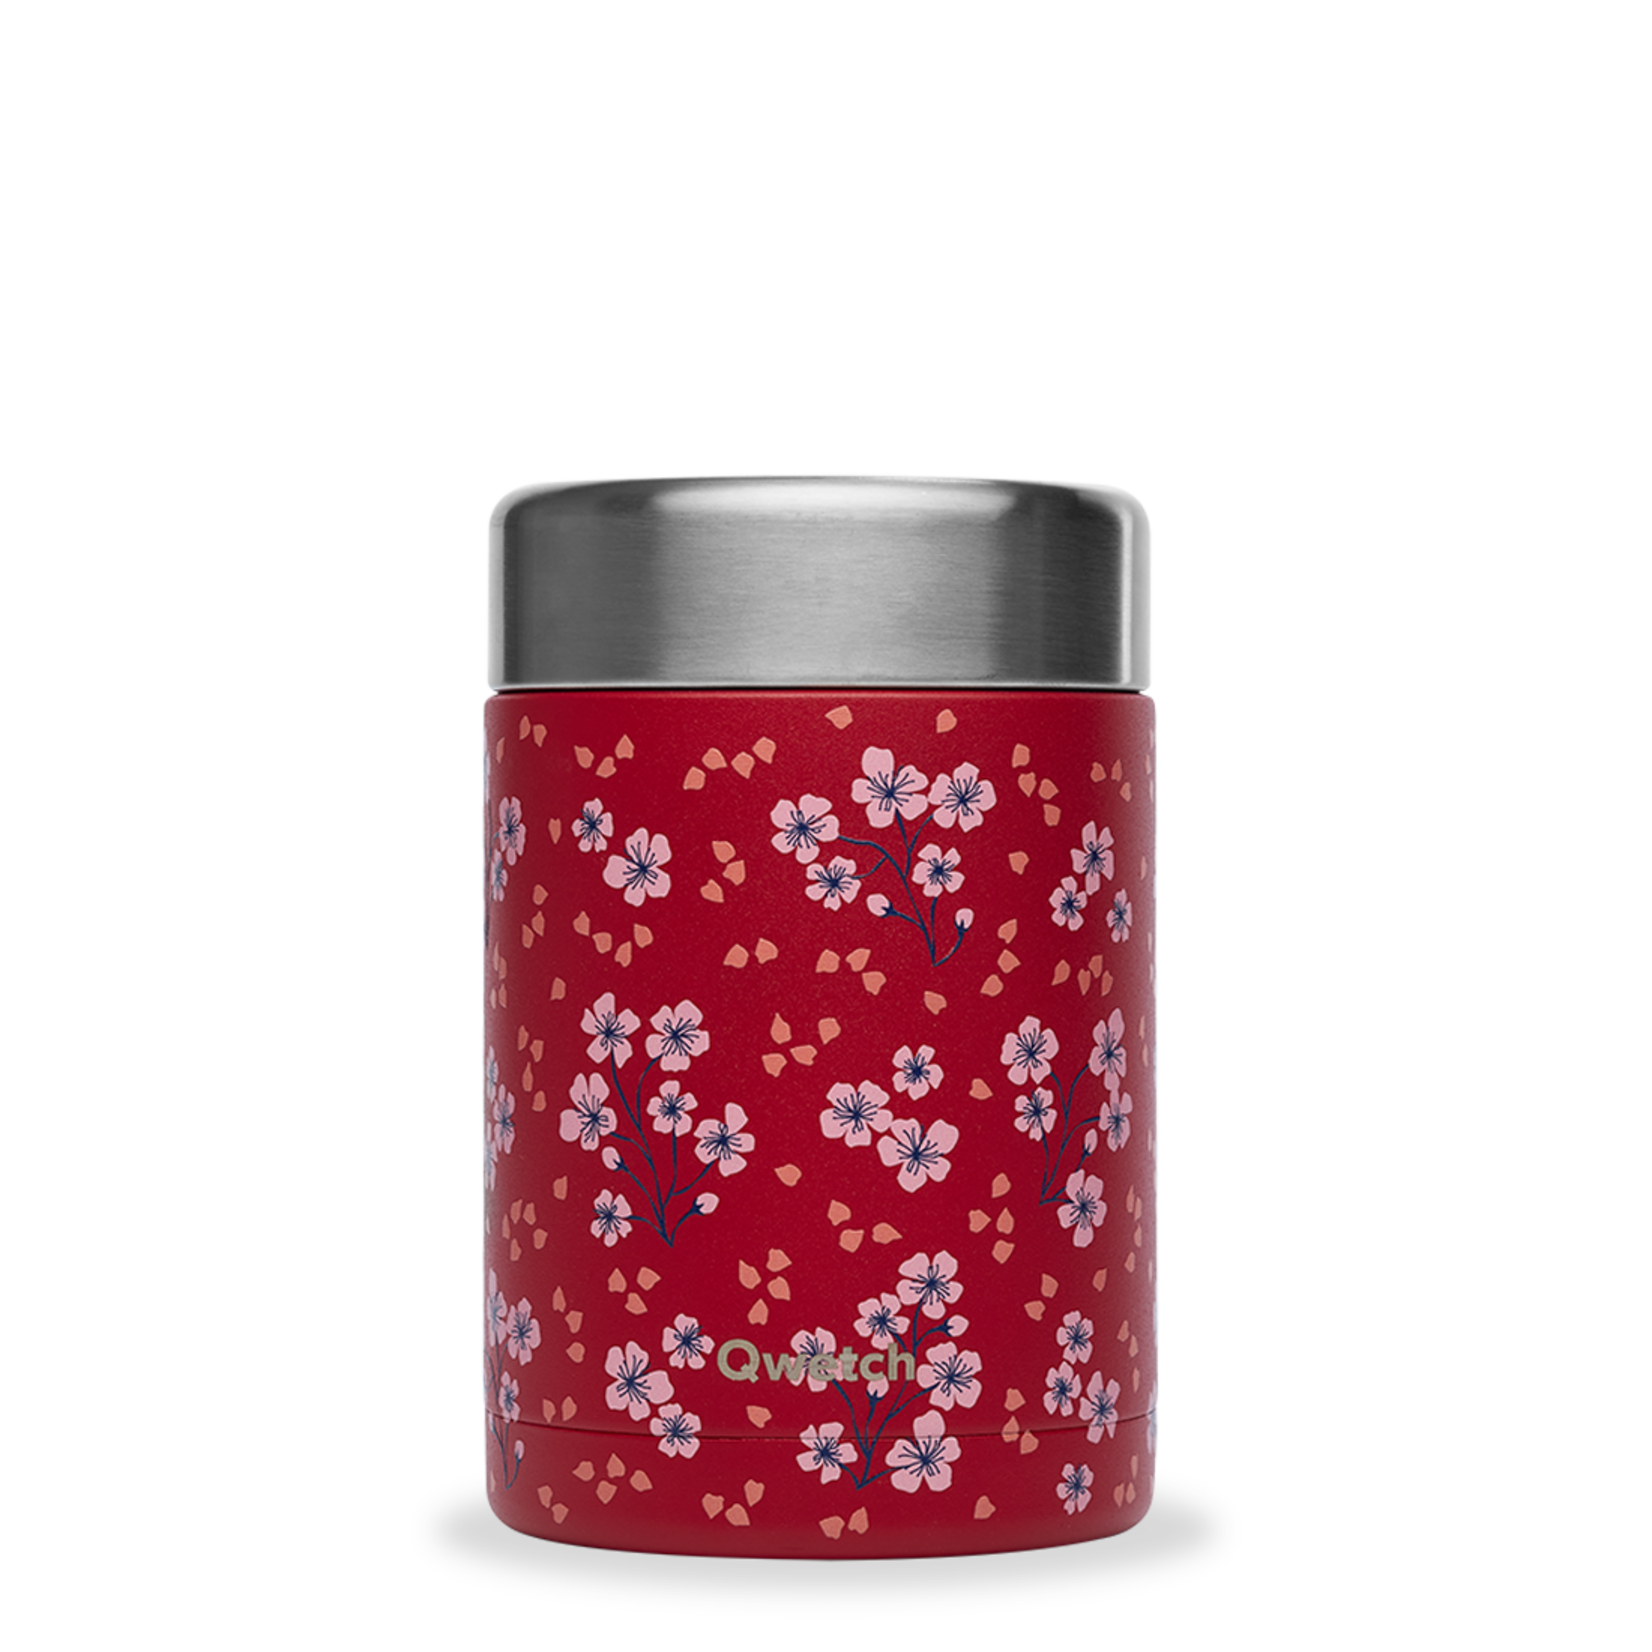 Qwetch Qwetch – boite repas isotherme hanami rouge – 650ml